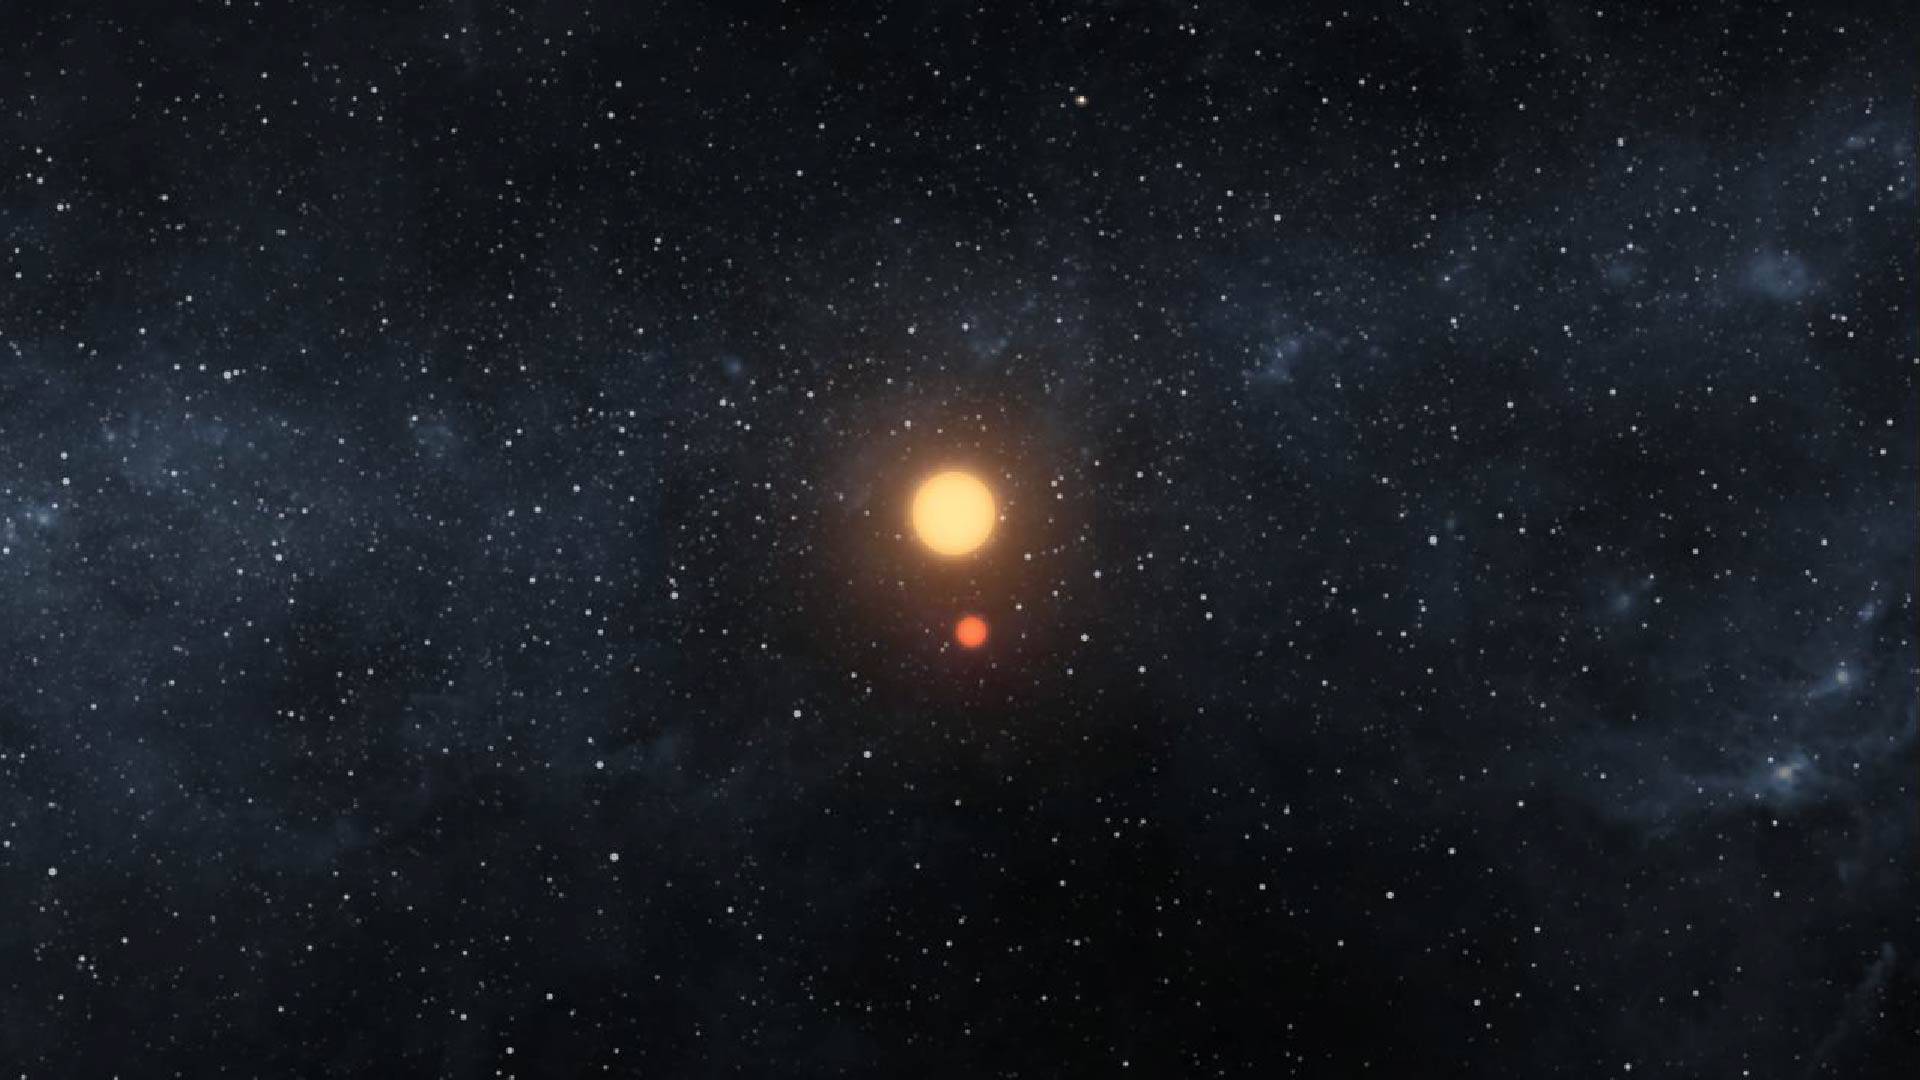 This artist image illustrates the Kepler-16 system from an overhead view, showing the eccentric orbits of the two stars as they twirl around each other every 41 days like figure skaters.